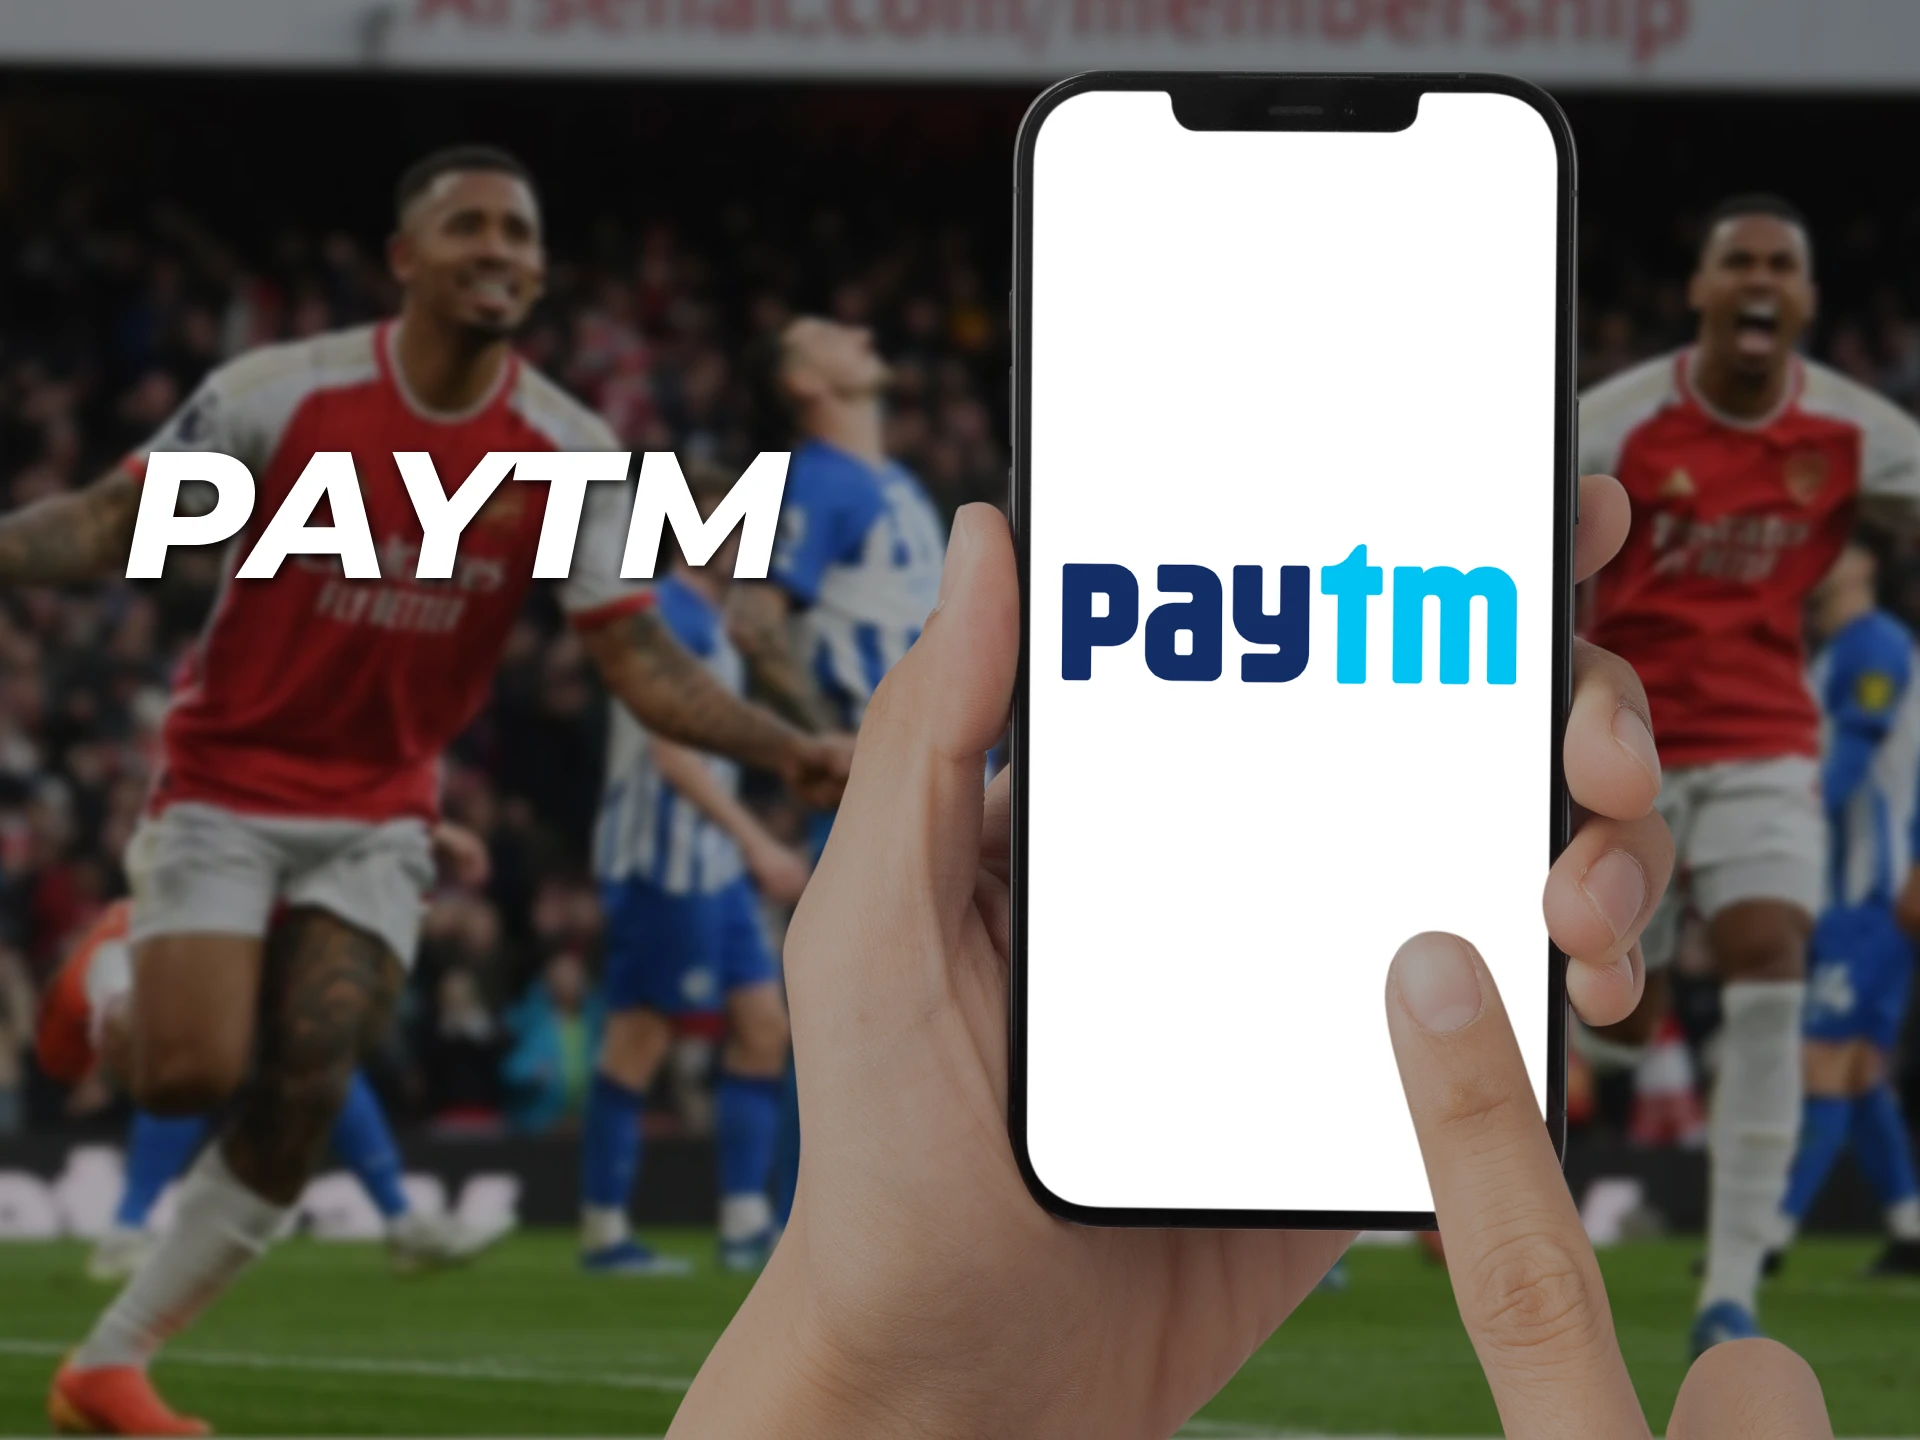 Paytm is an exclusive payment method for Indian costumers.